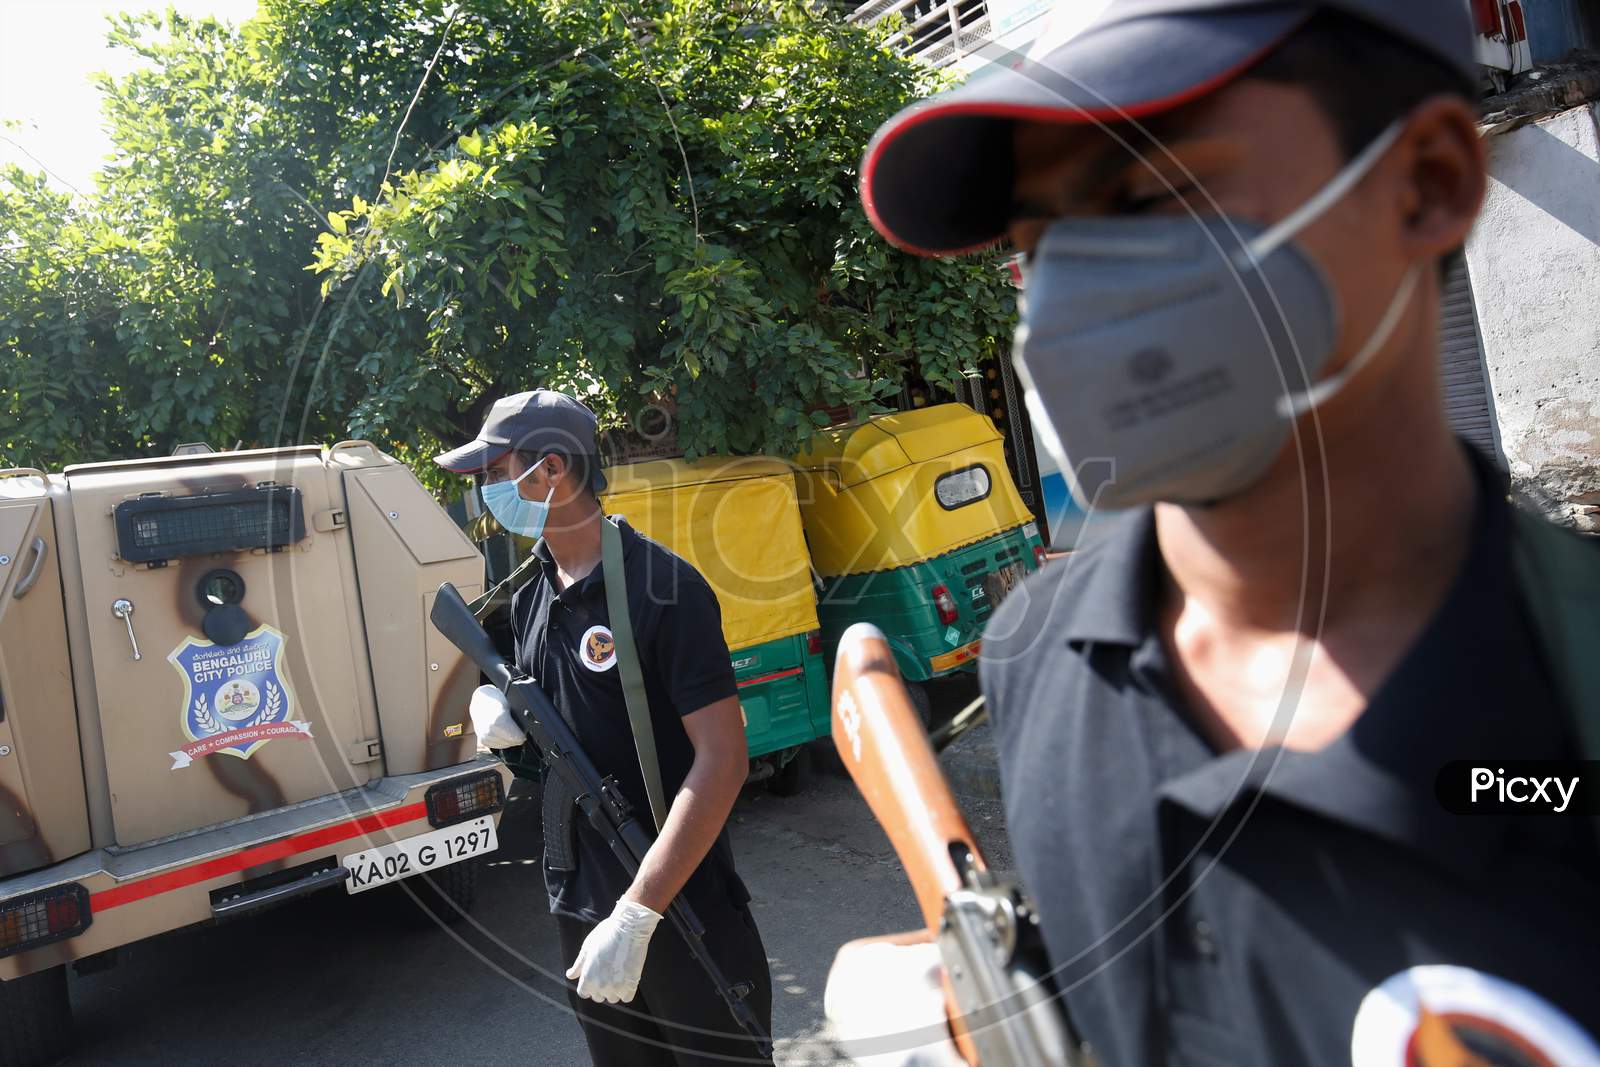 Bangalore City Police  Wearing Masks And Attending Duties During Lockdown For Corona virus Or Covid-19 pandemic in Bangalore City